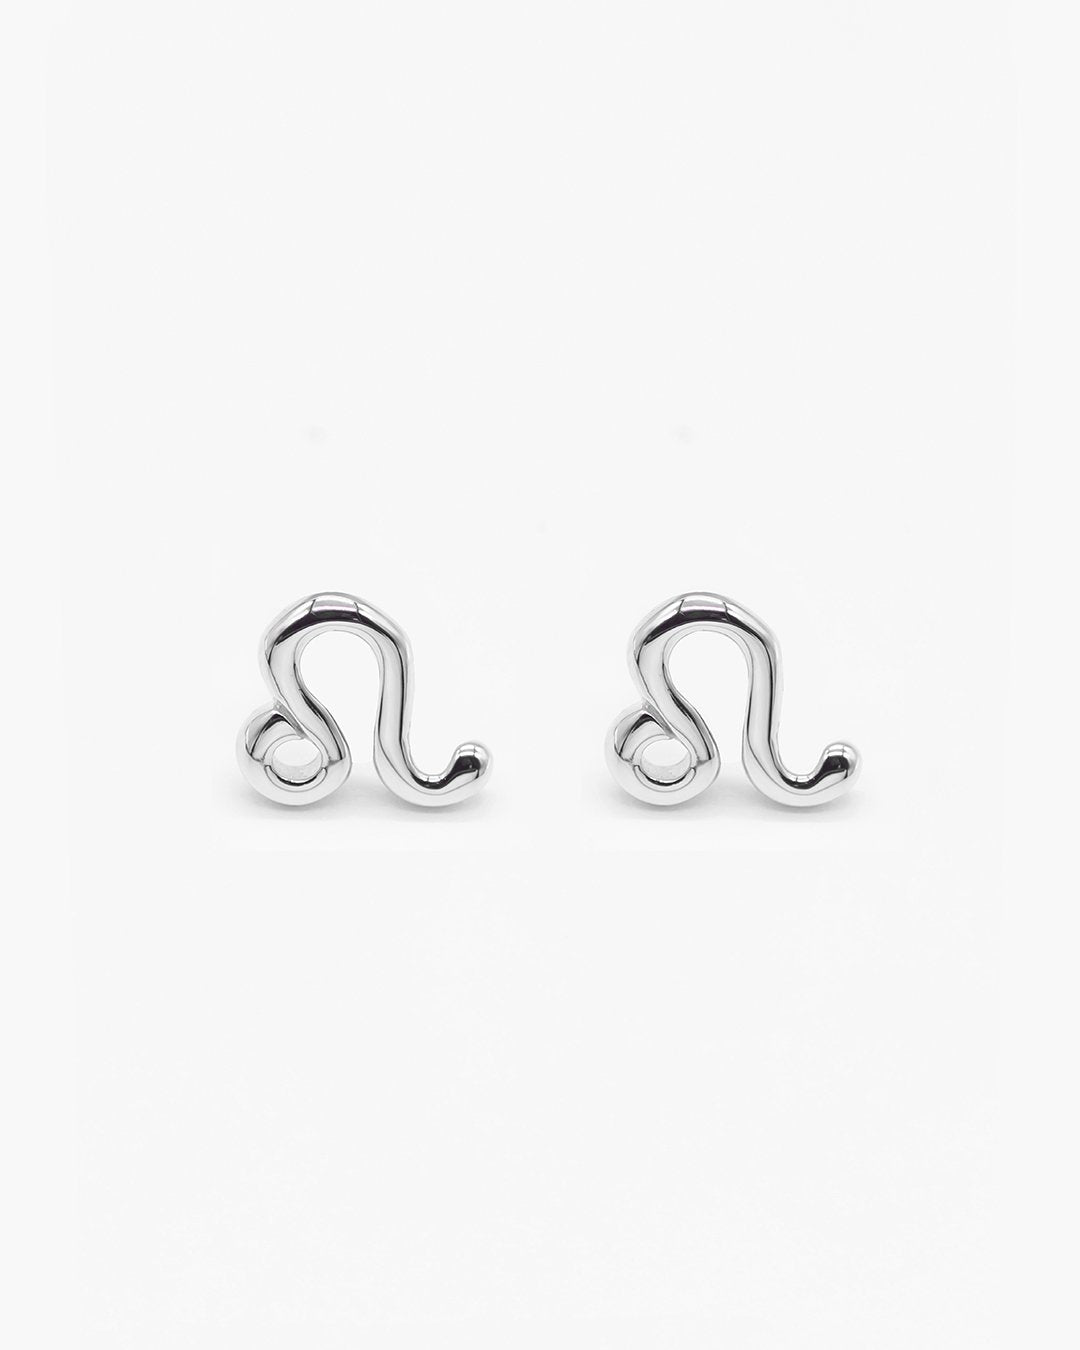 STAR SIGN STUDS - SILVER